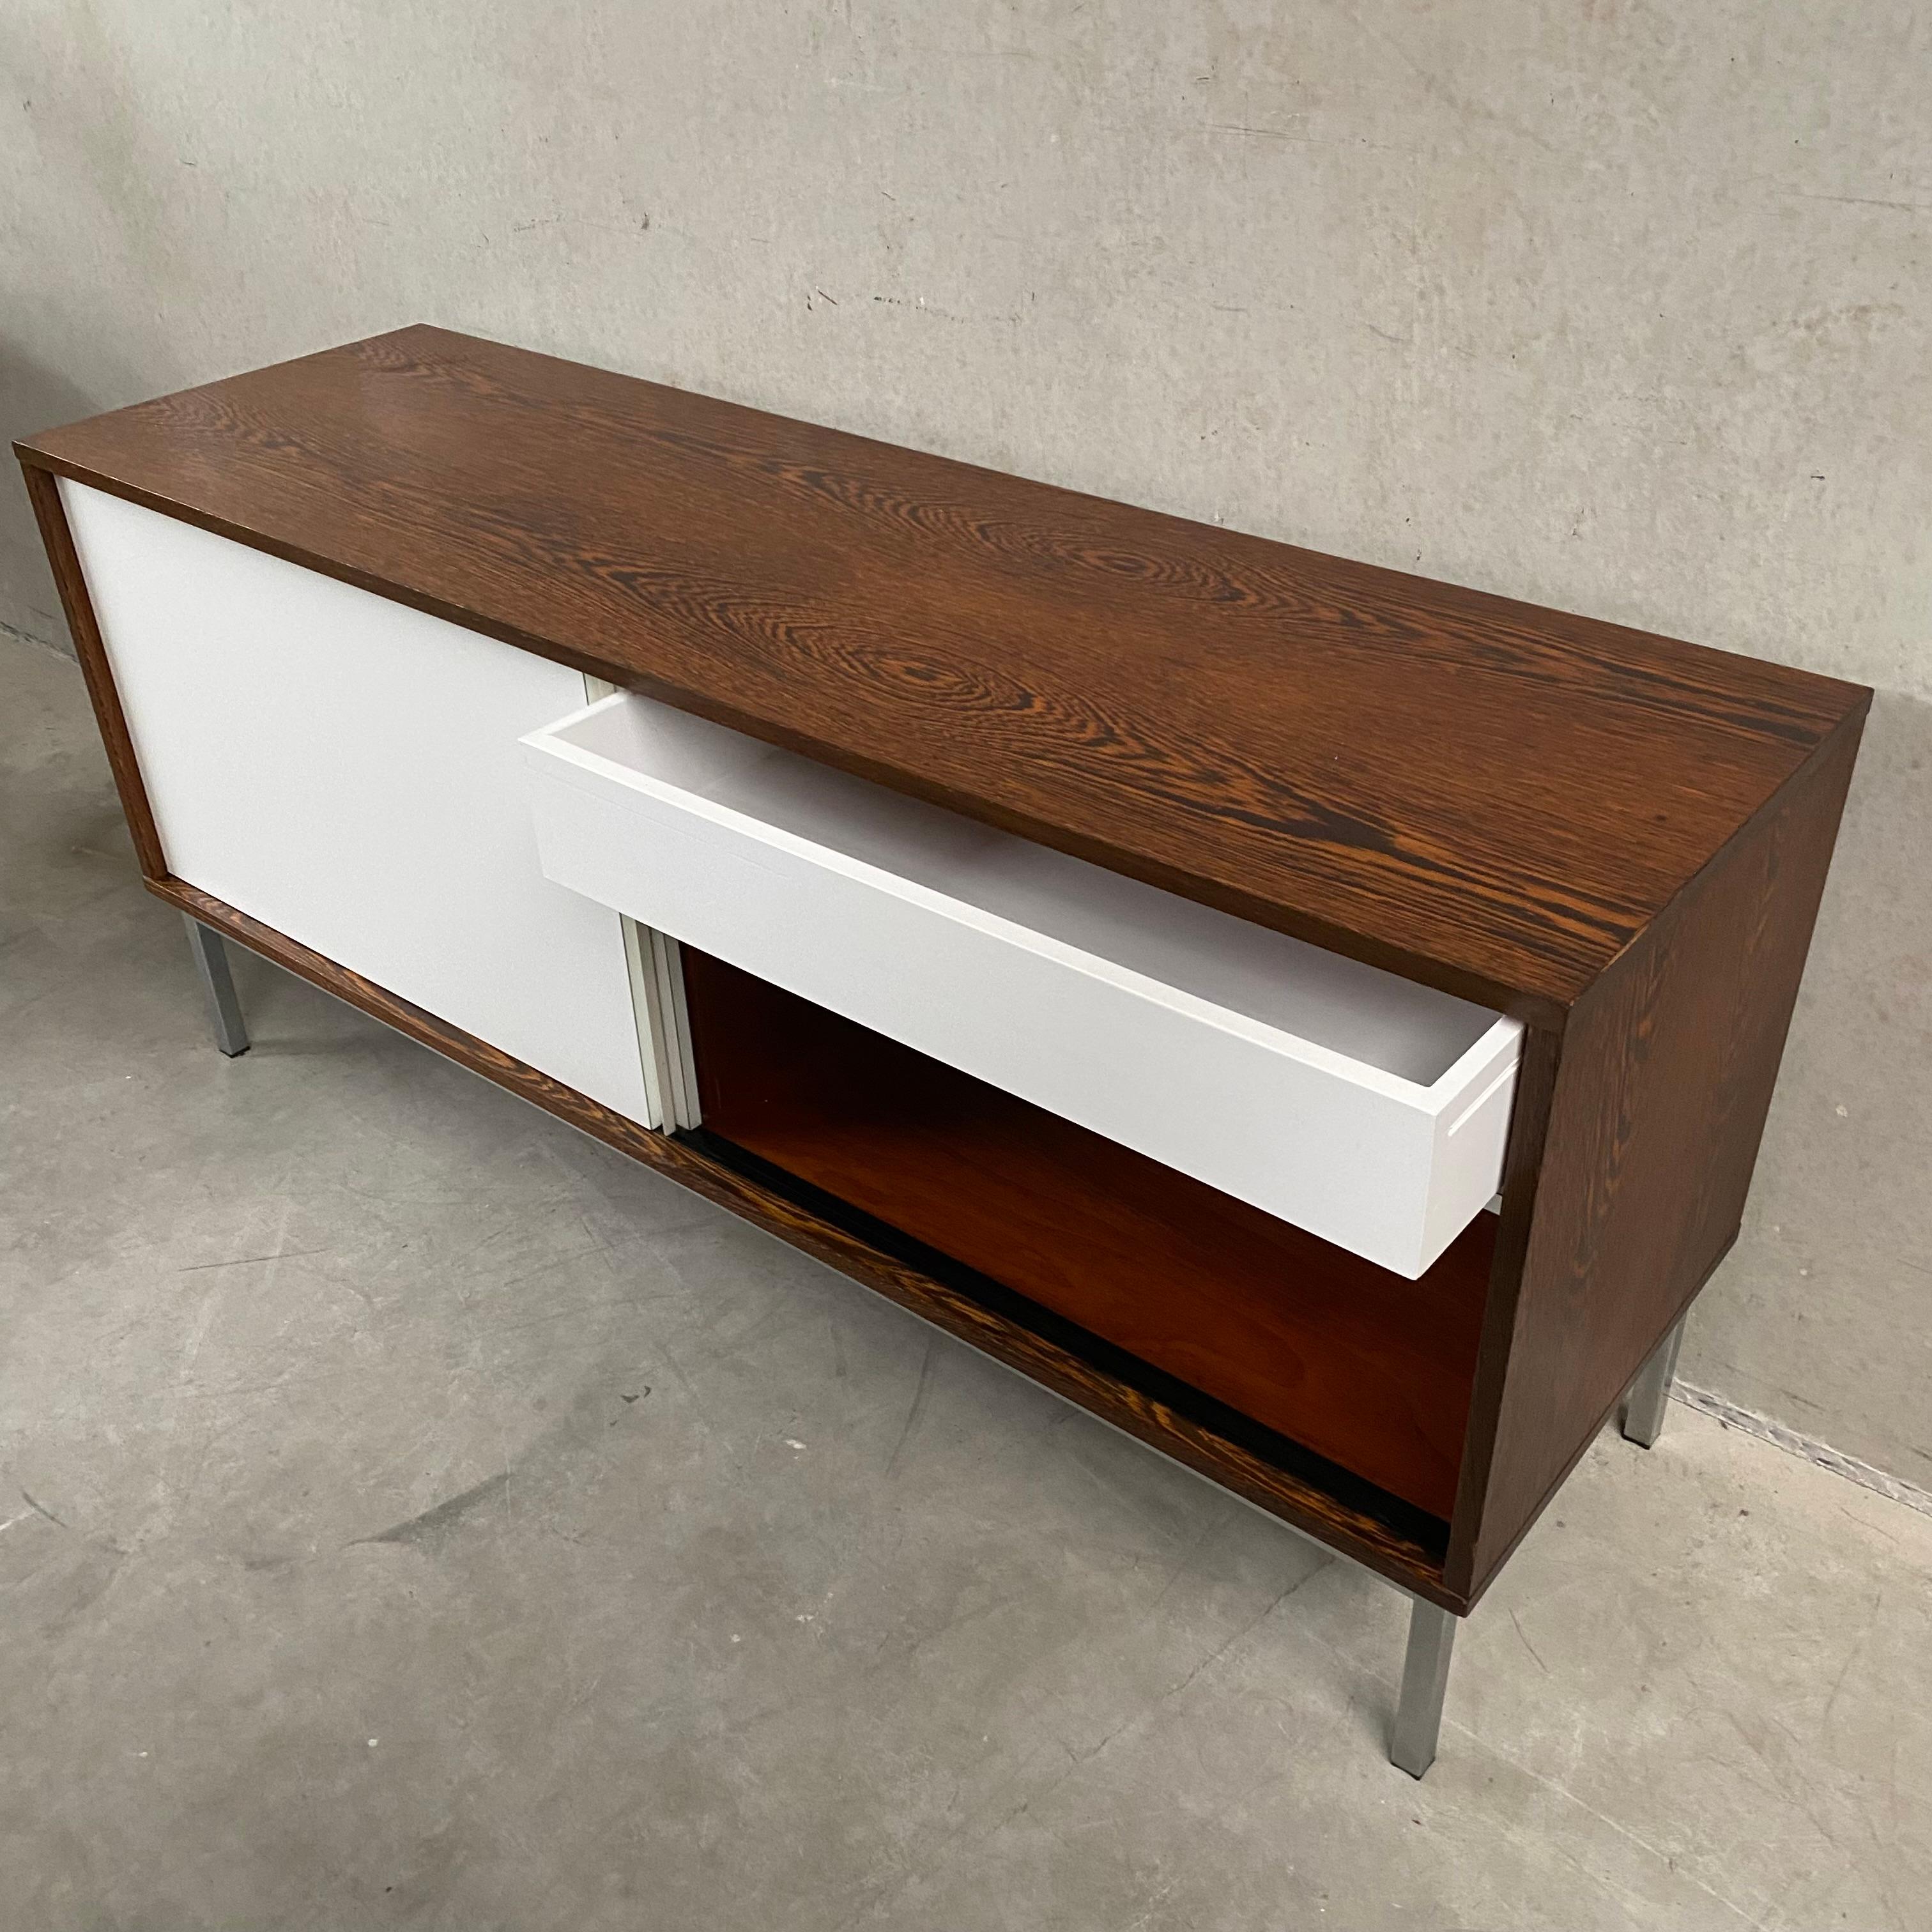 Mid-20th Century Wengé sideboard by Martin Visser for 't Spectrum, Netherlands 1960s